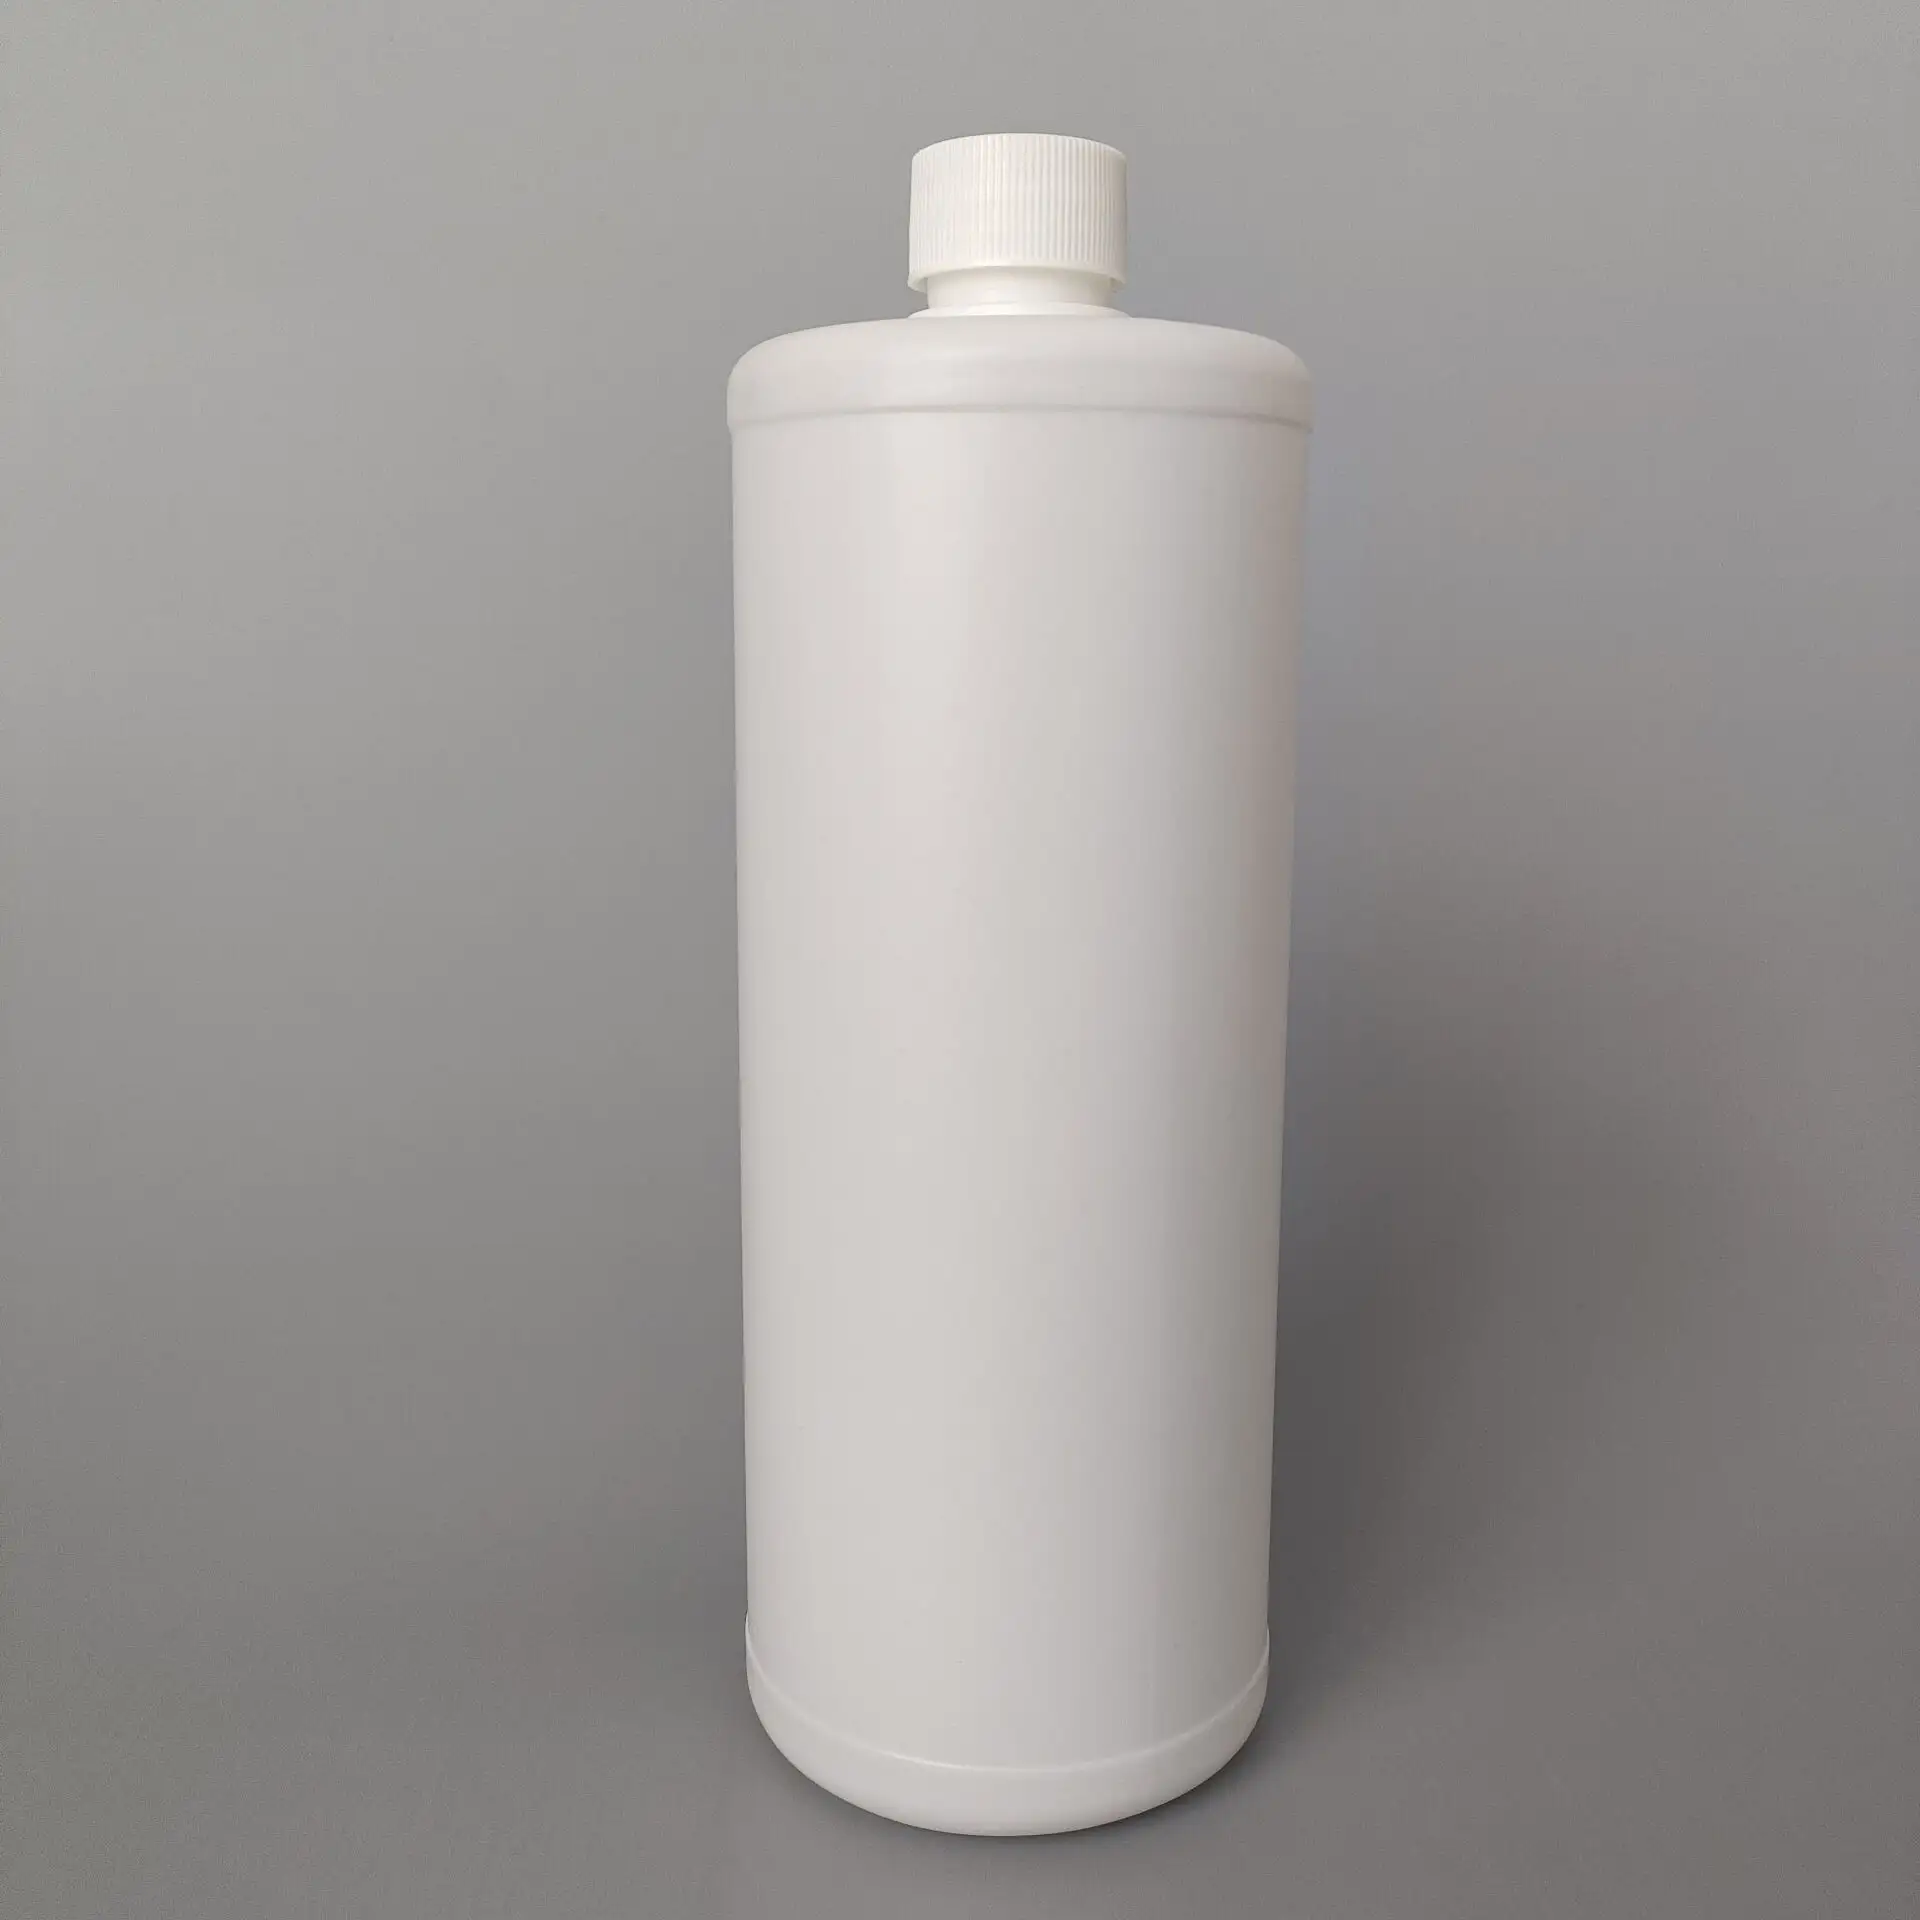 Manufacture HDPE White Plastic 1000ml 1L Cleaning Chemical medicine plastic bottle With Screw Cap